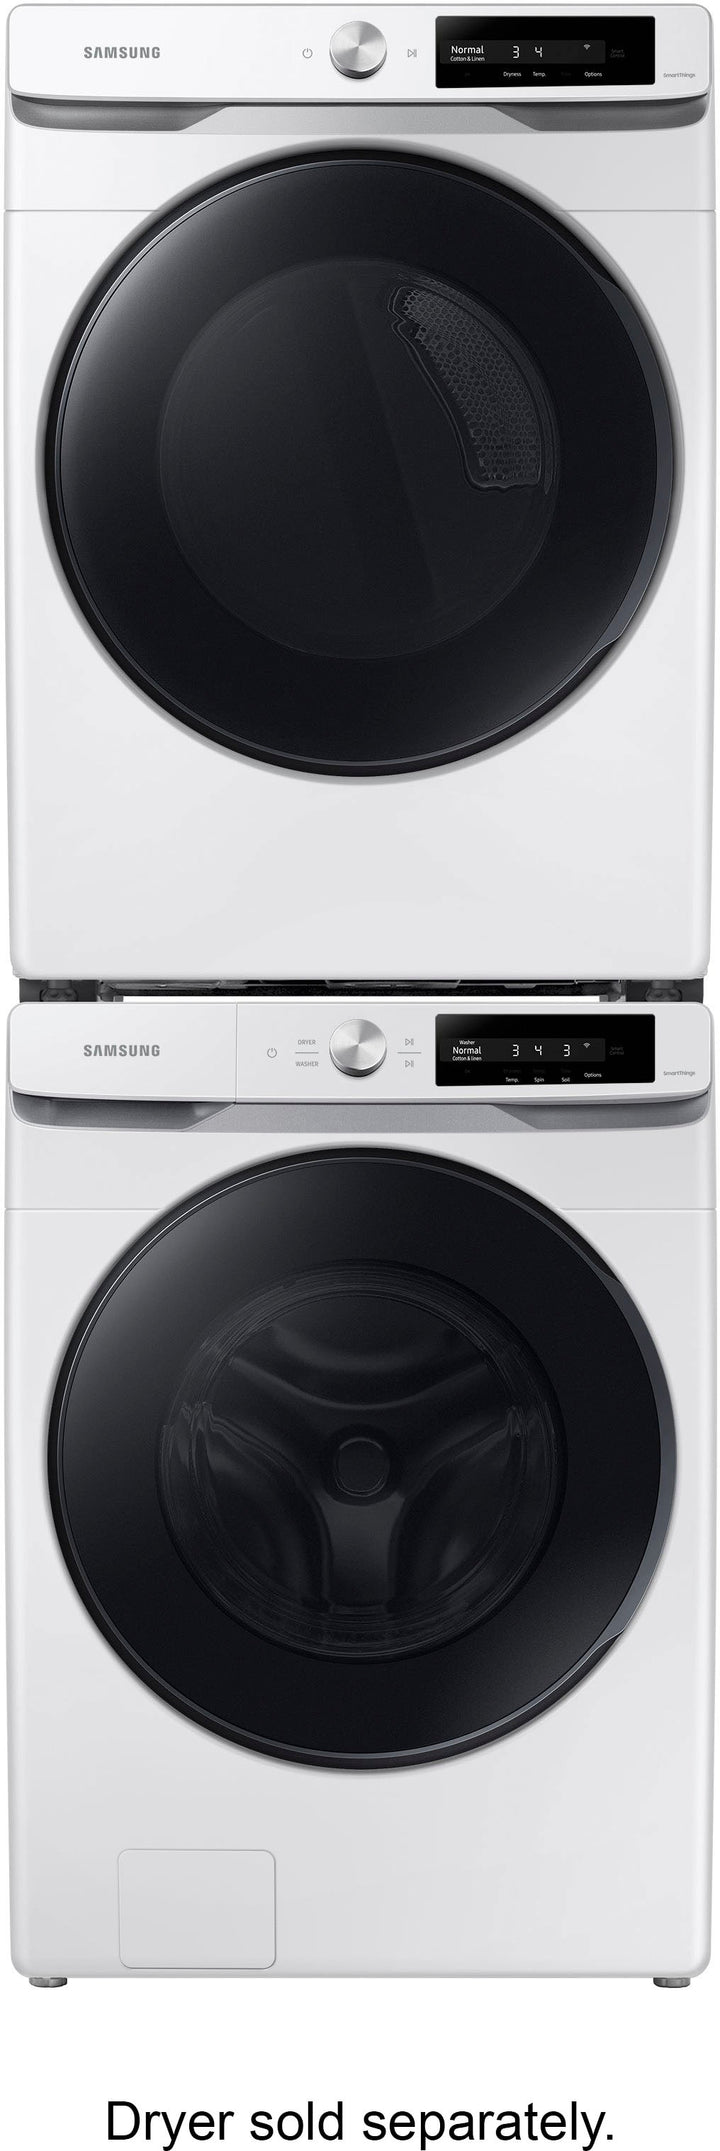 Samsung - 4.5 cu. ft. Large Capacity Smart Dial Front Load Washer with Super Speed Wash - White_25